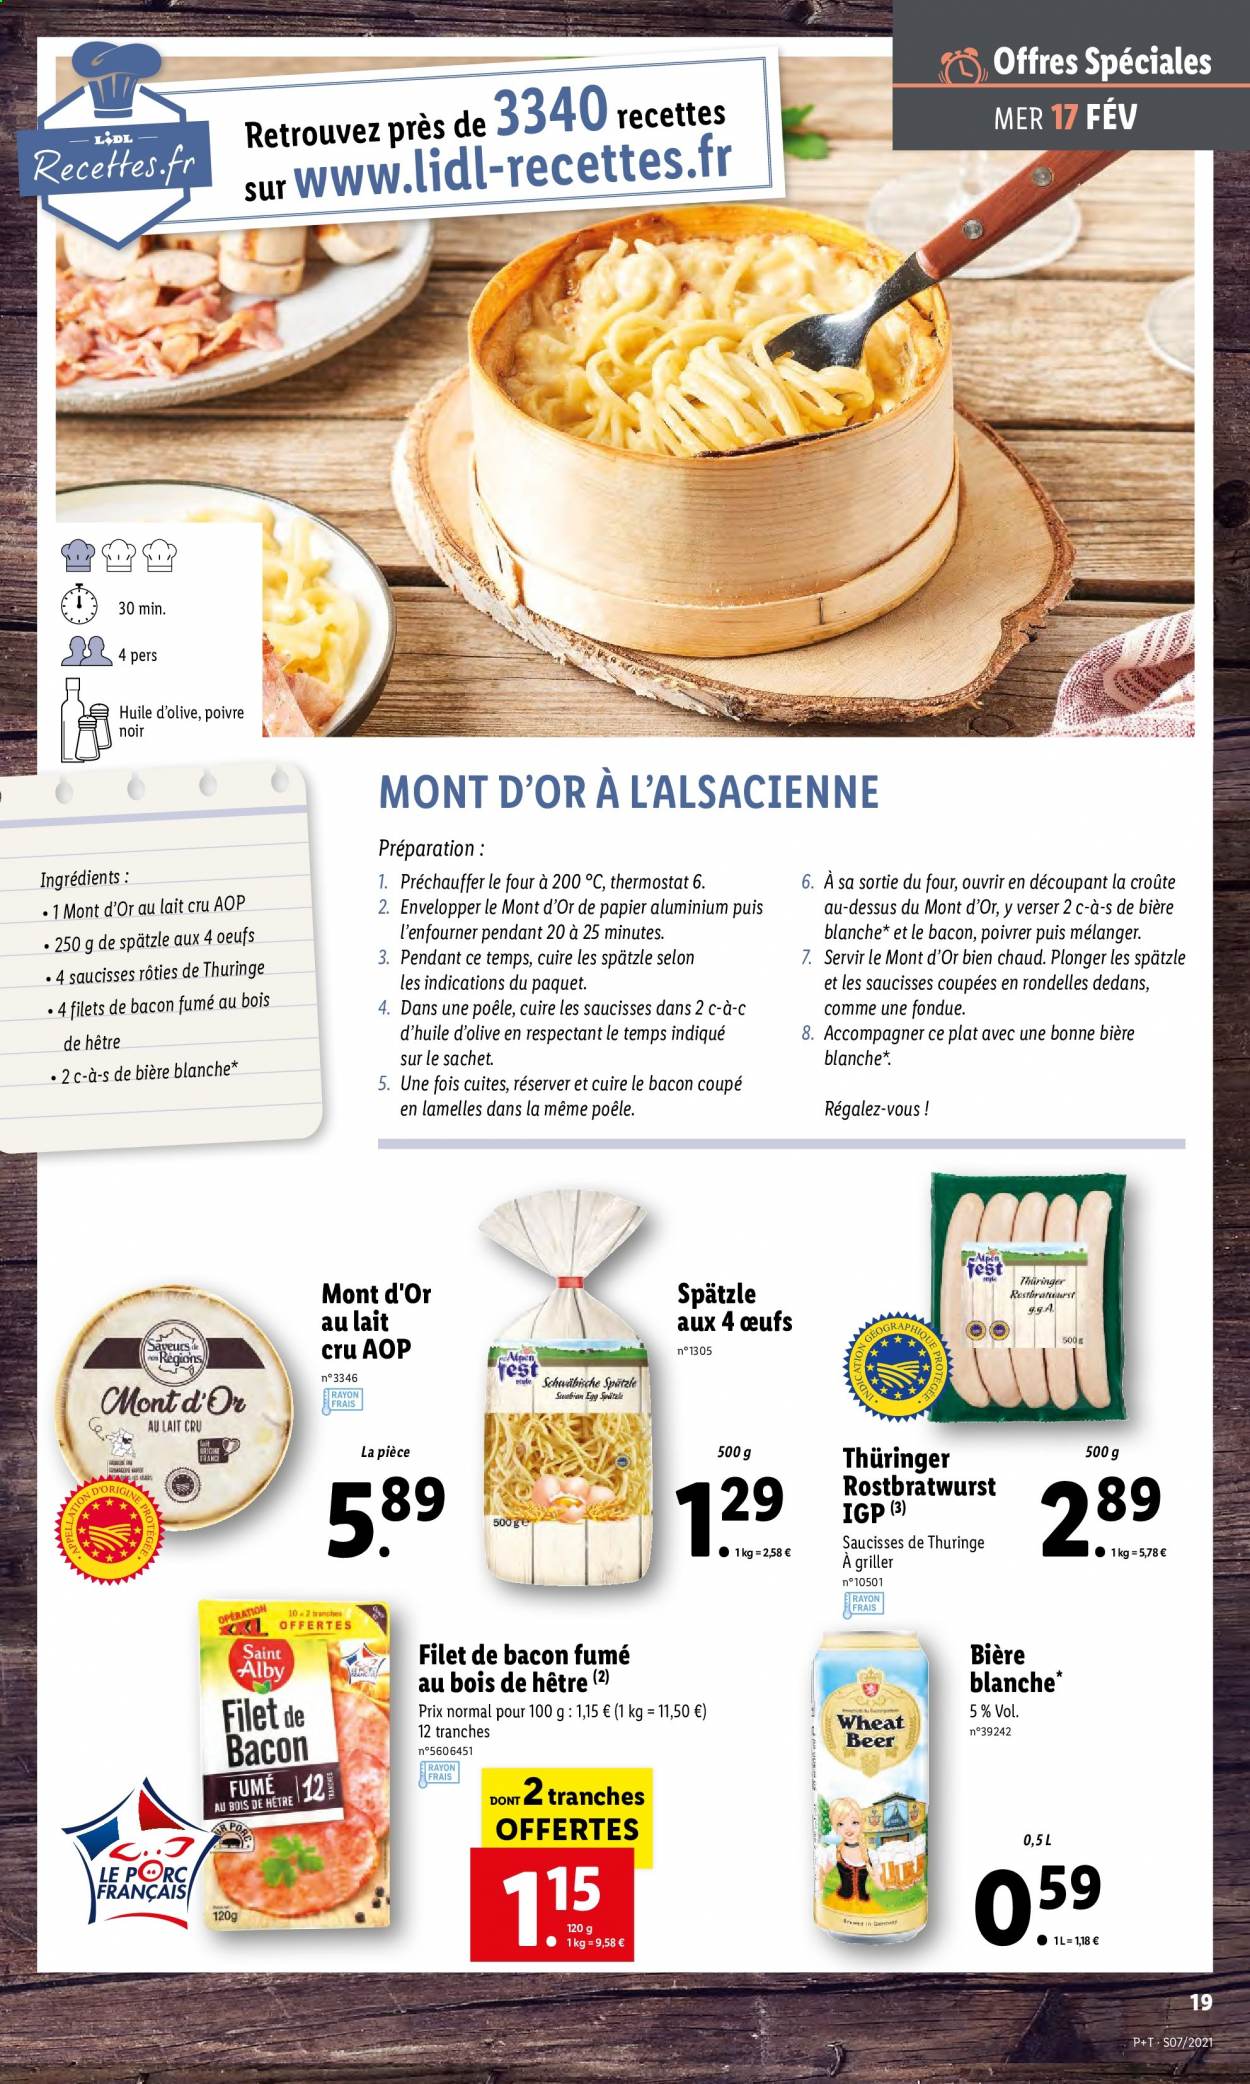 Catalogue Lidl - 17.02.2021 - 23.02.2021. Page 19.